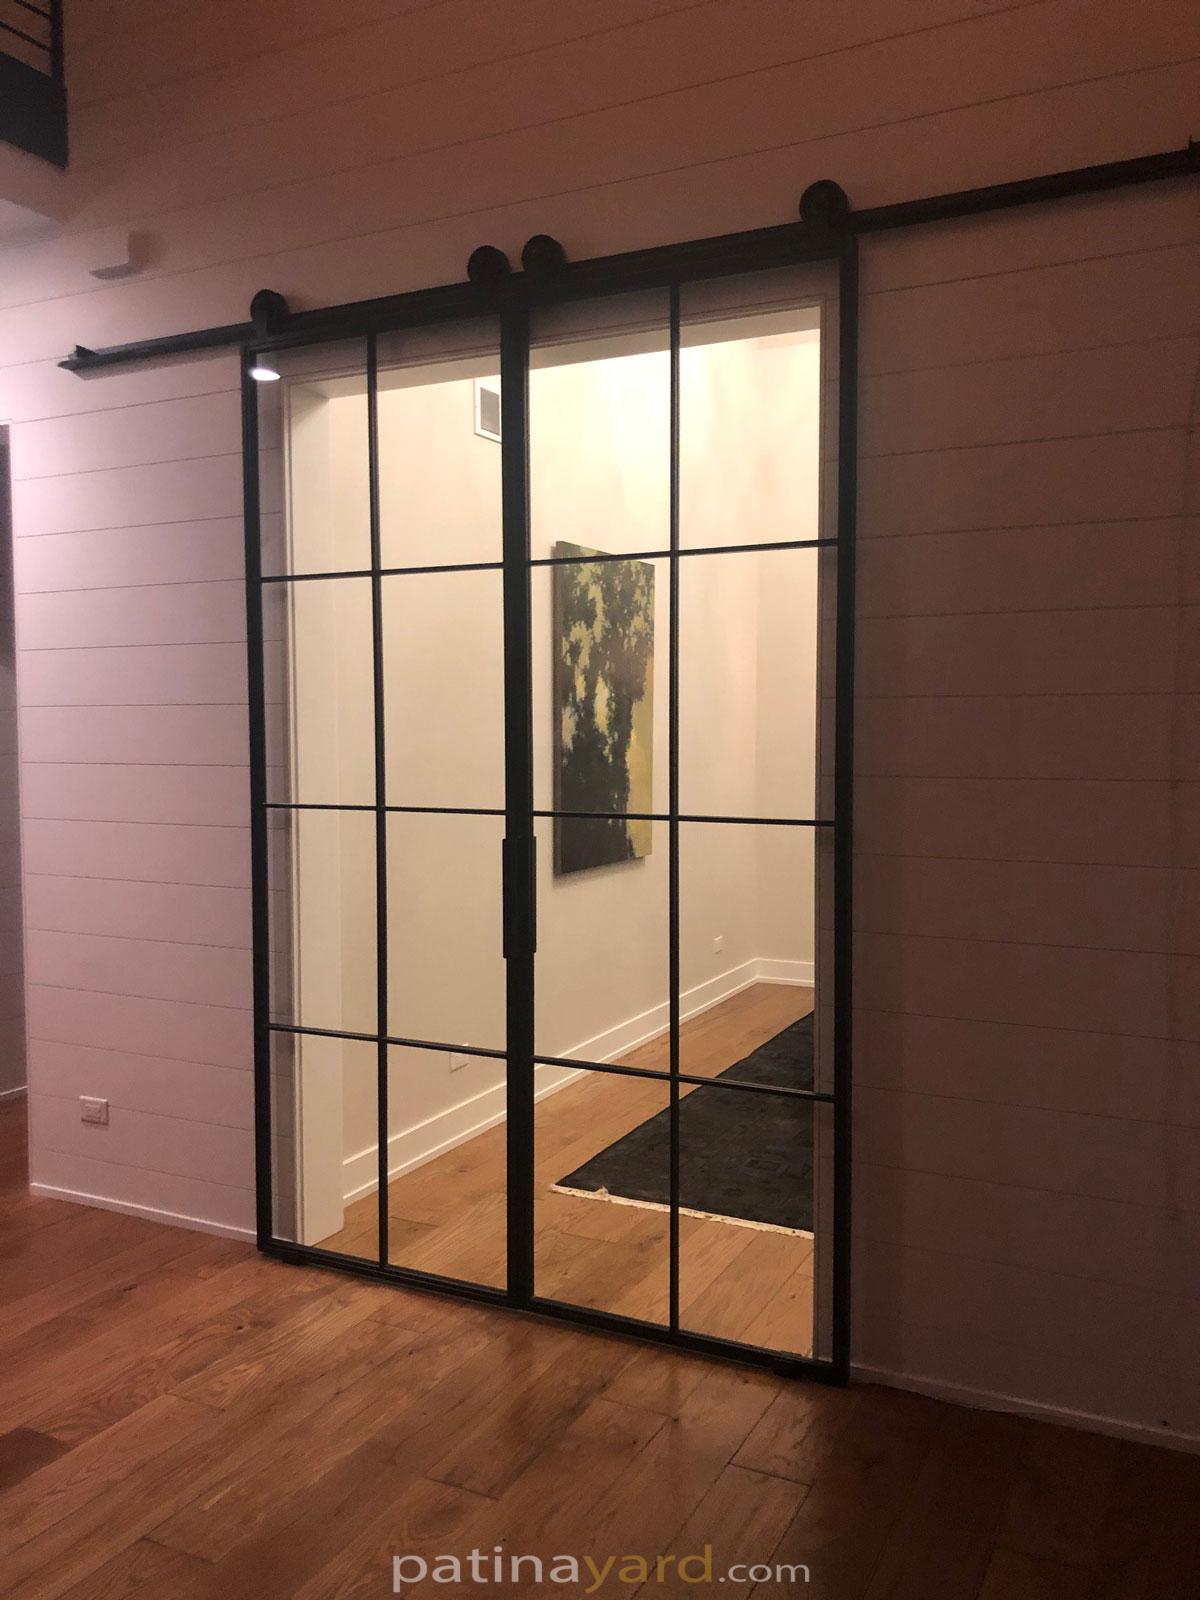 Double steel and clear glass barn doors